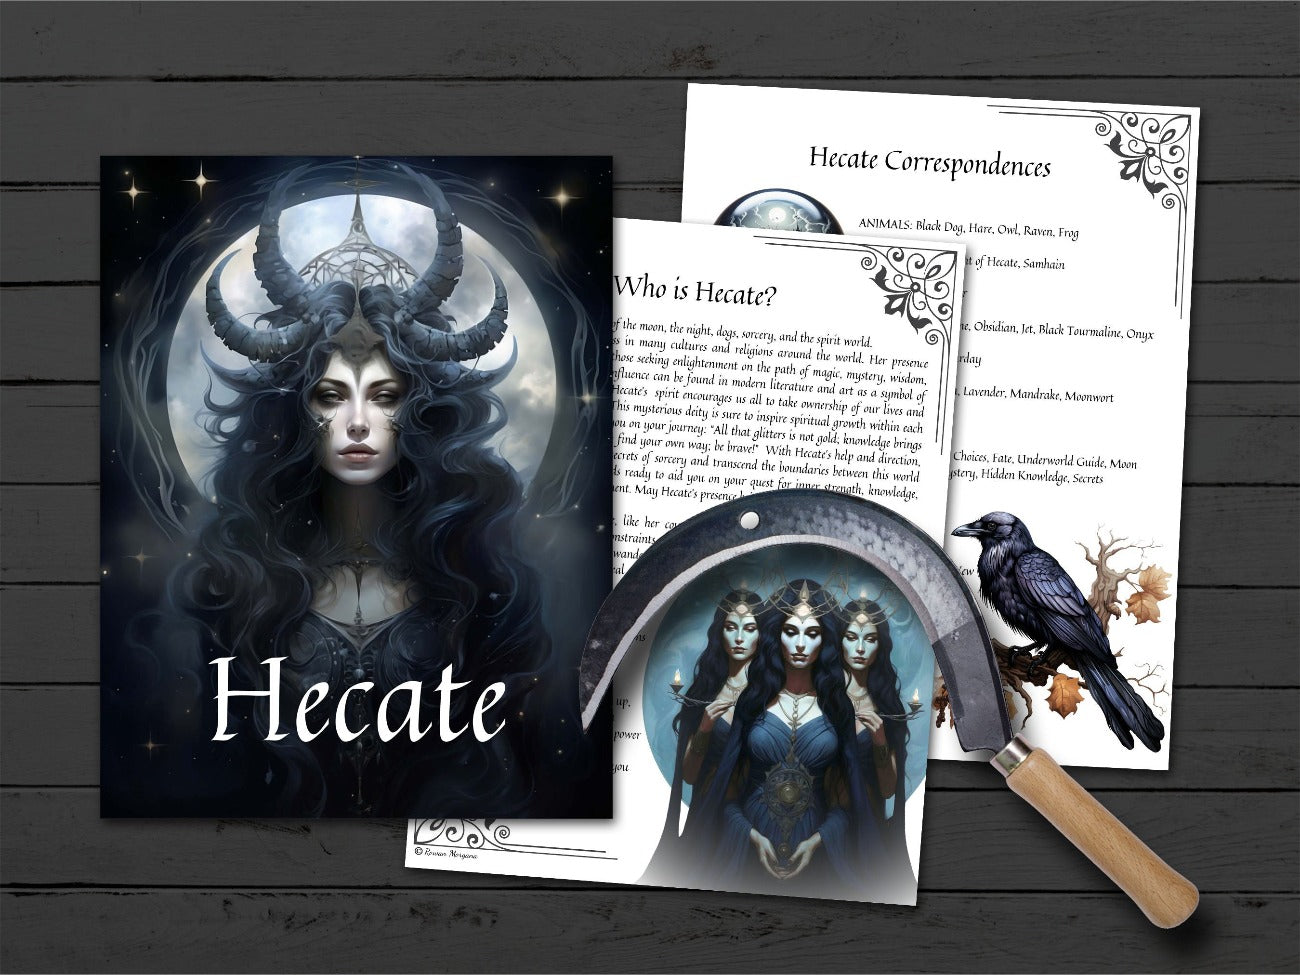 GODDESS HECATE, first three pages Hecate title page, Who is Hecate, Hecate correspondences - Morgana Magick Spell